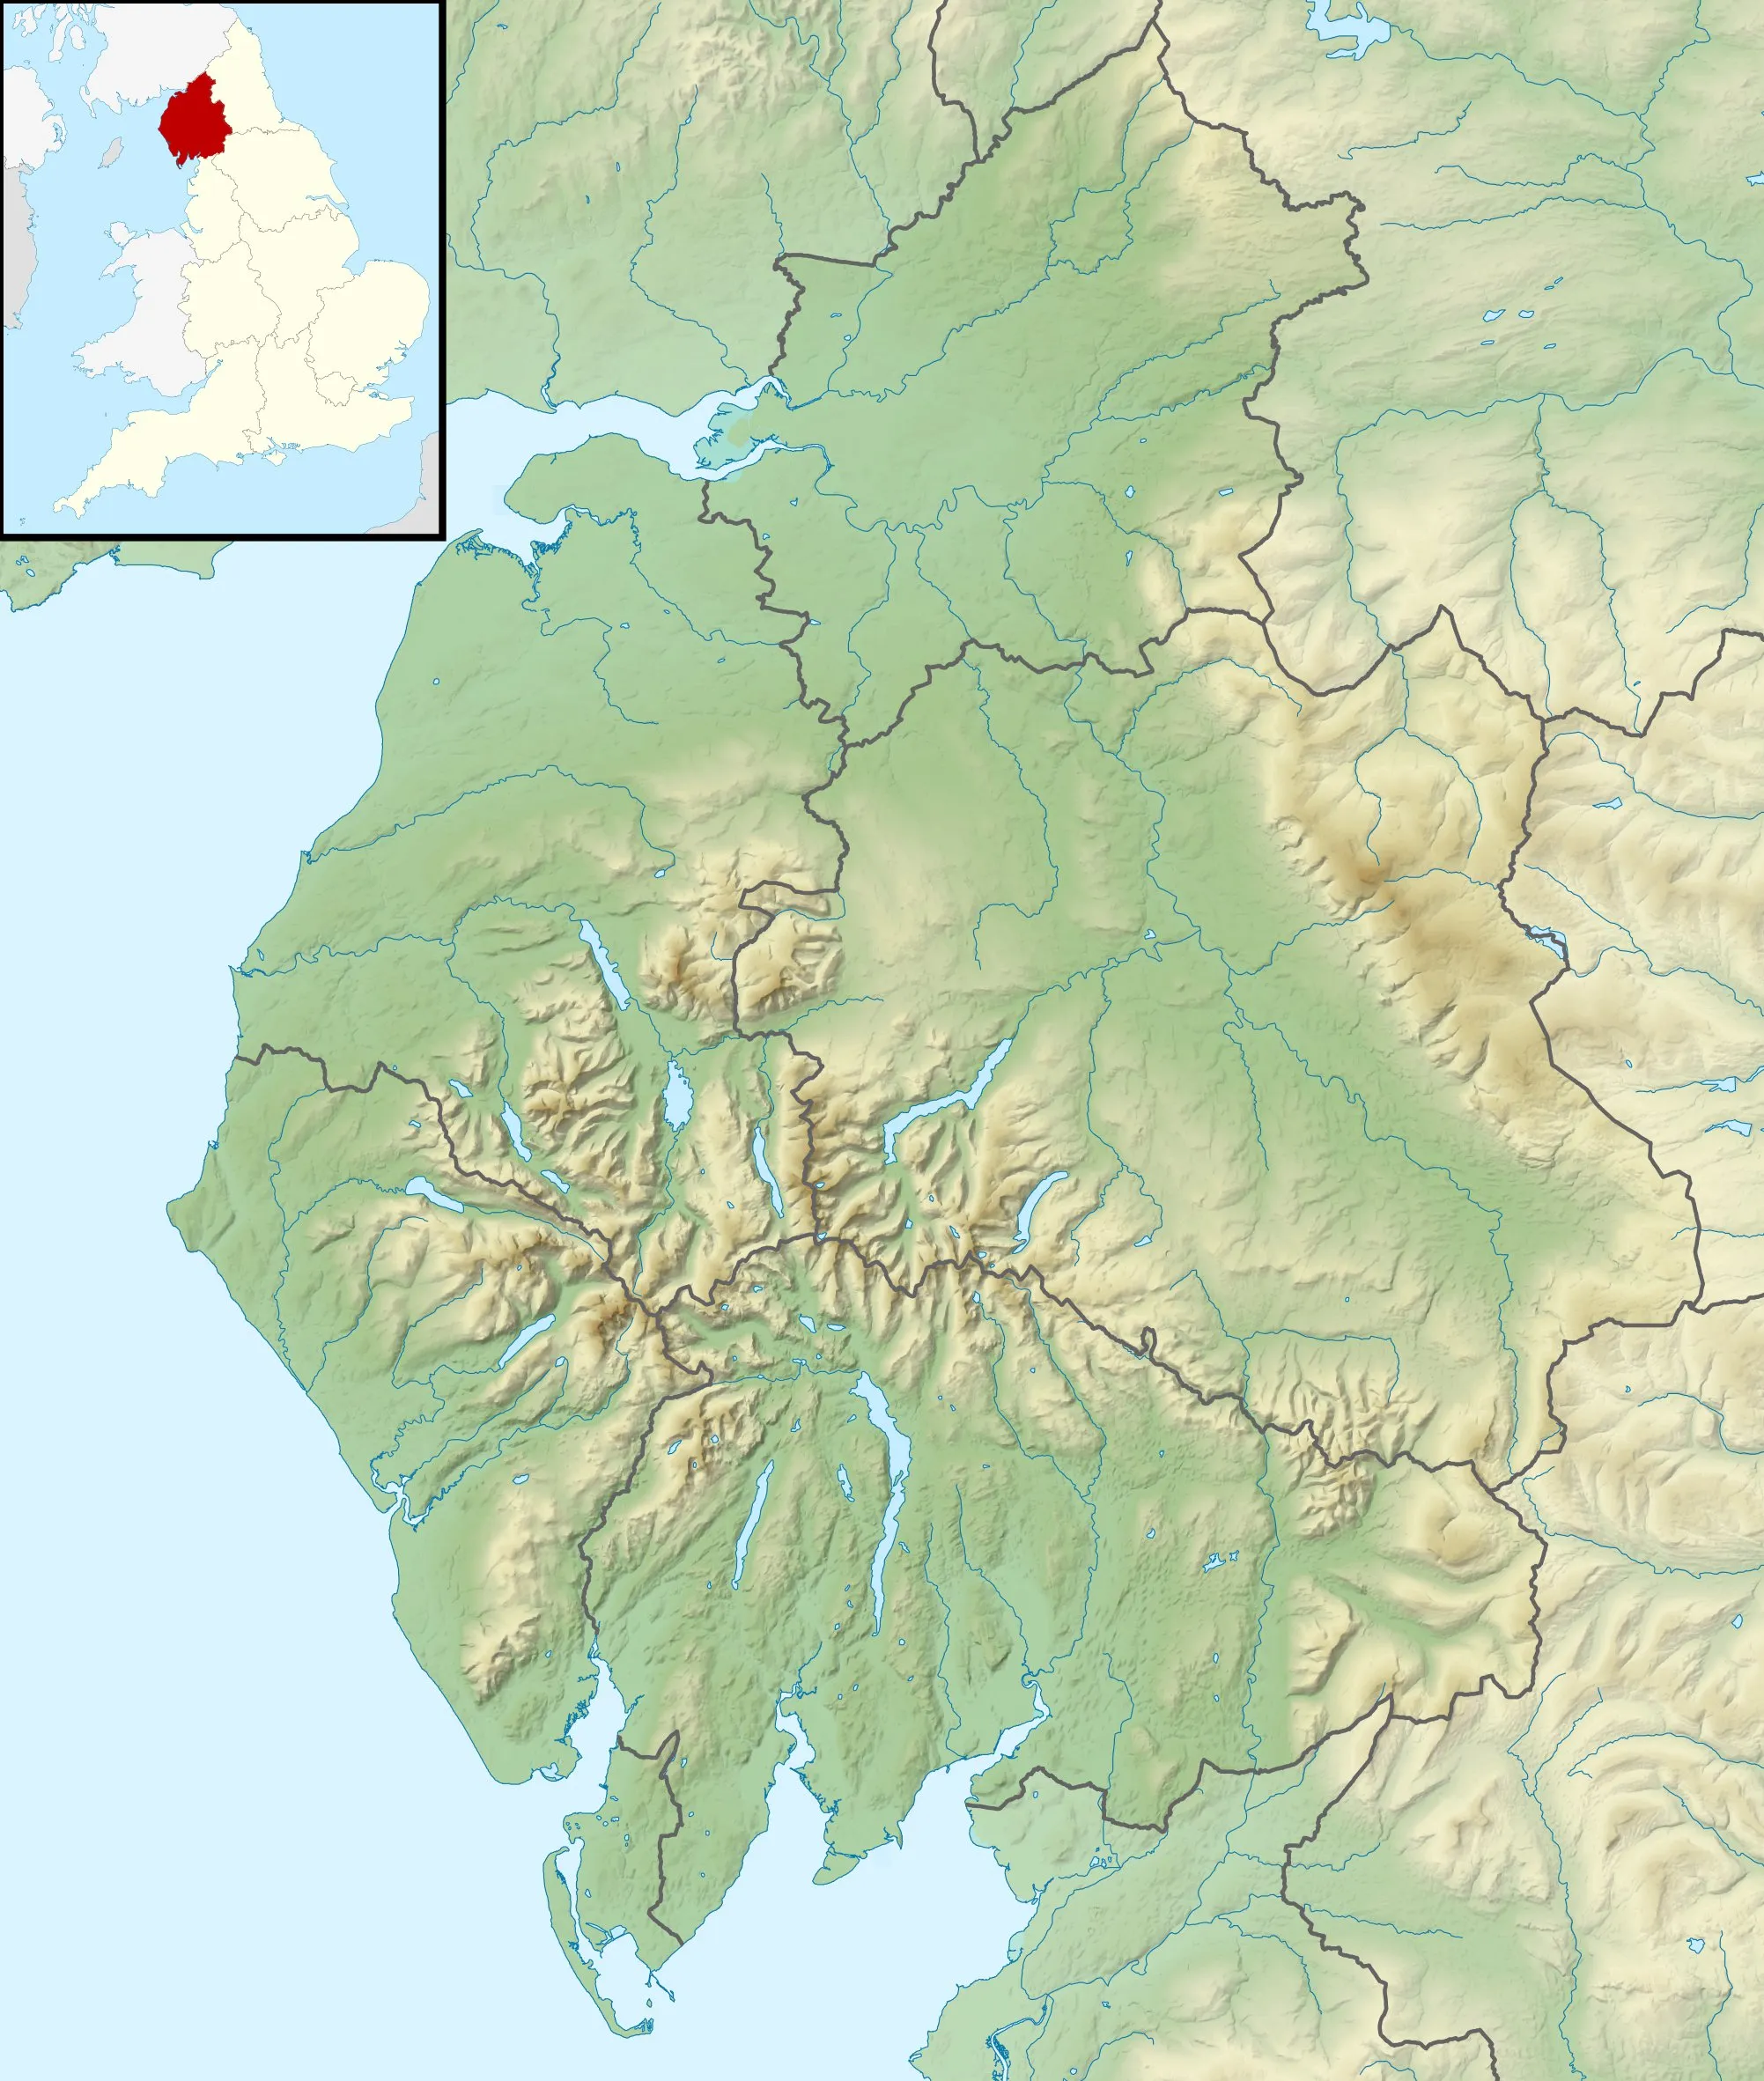 Photo showing: Relief map of Cumbria, UK.
Equirectangular map projection on WGS 84 datum, with N/S stretched 170%
Geographic limits:

West: 3.80W
East: 2.10W
North: 55.20N
South: 54.02N